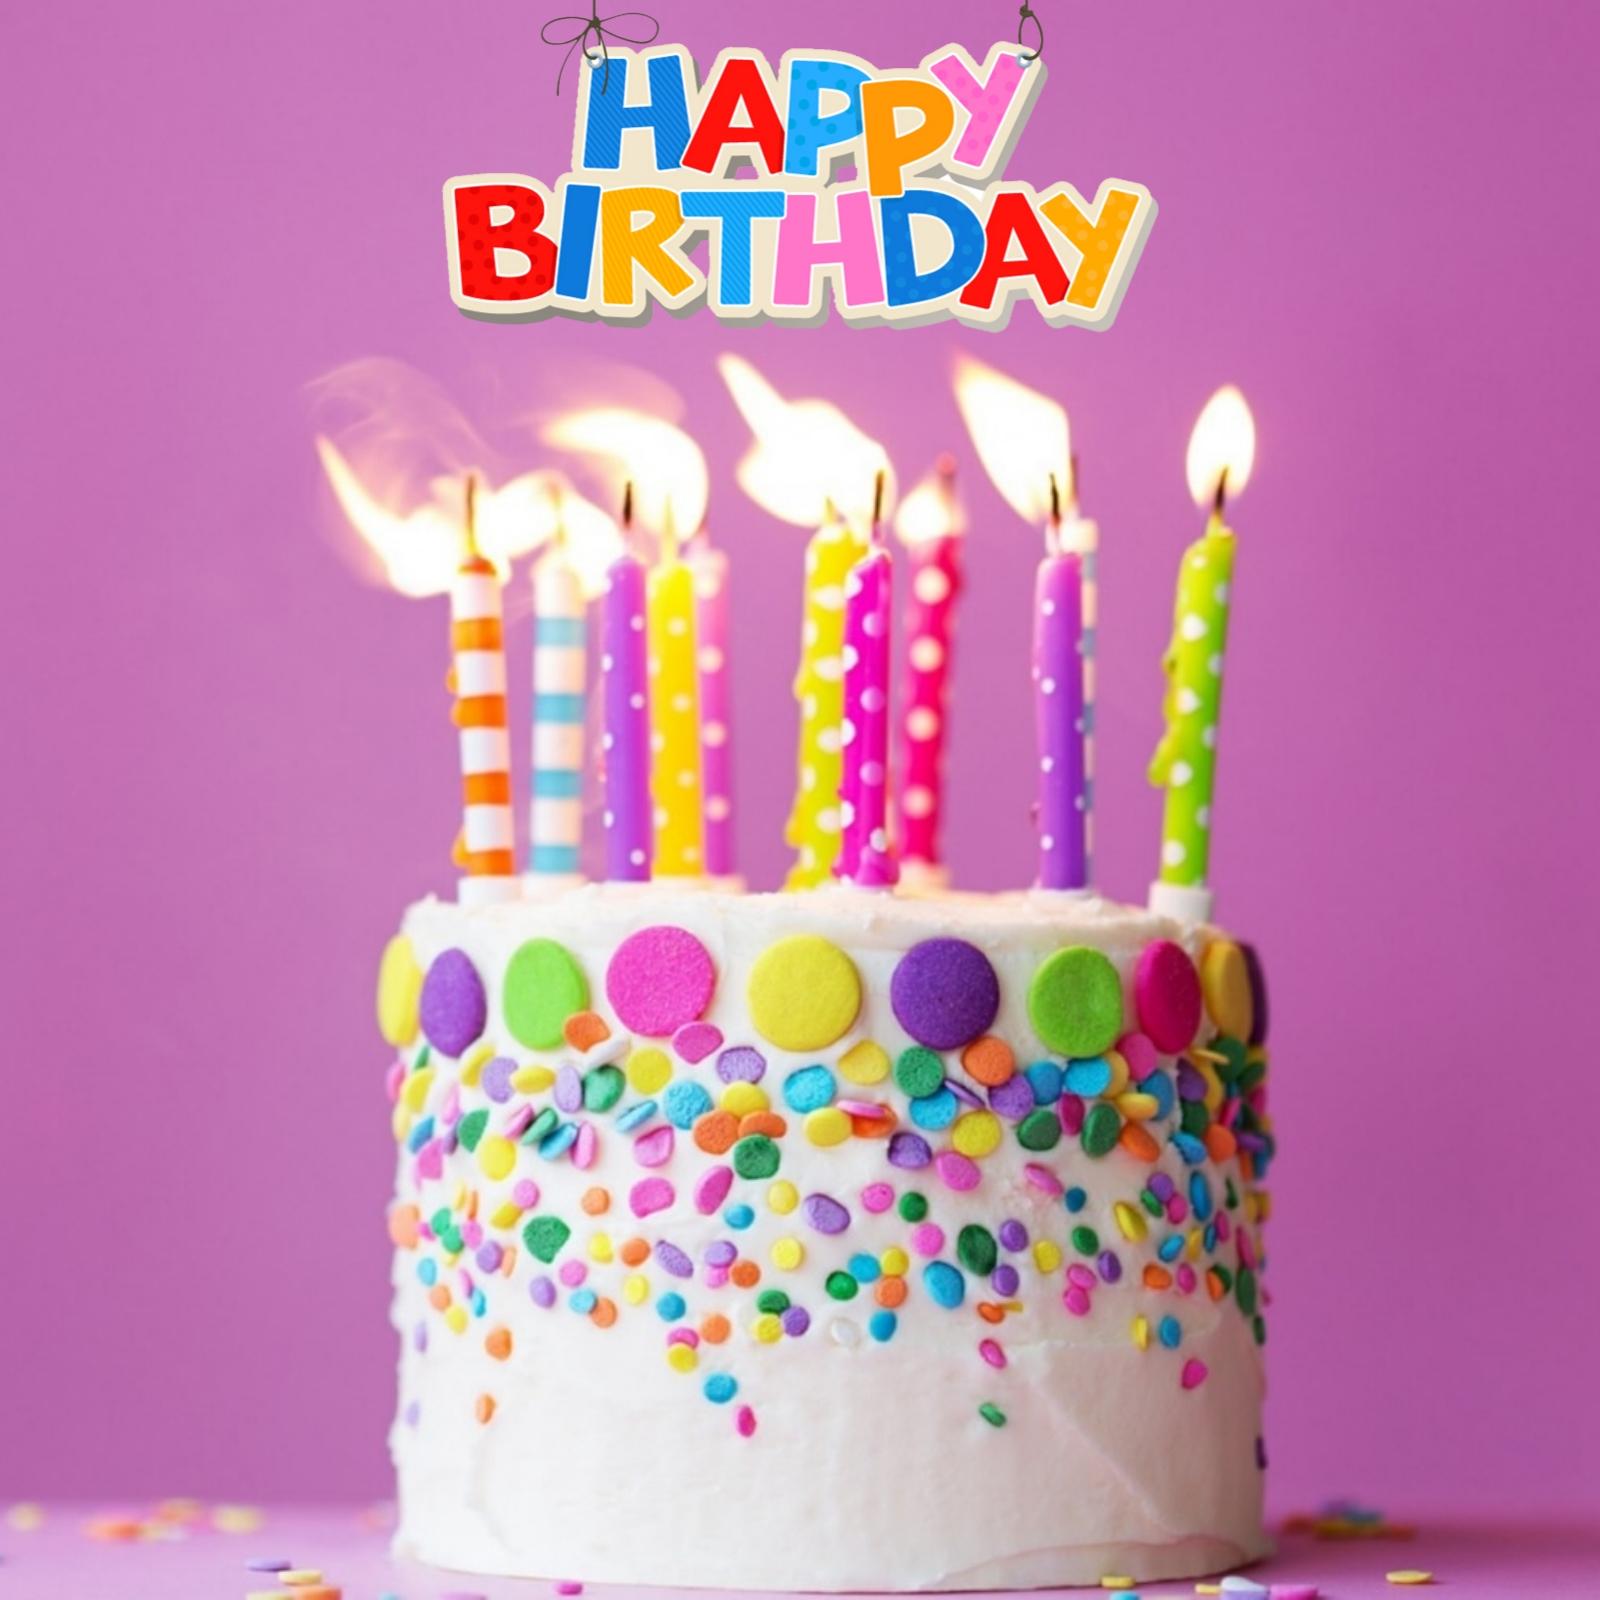 Happy Birthday Images Download